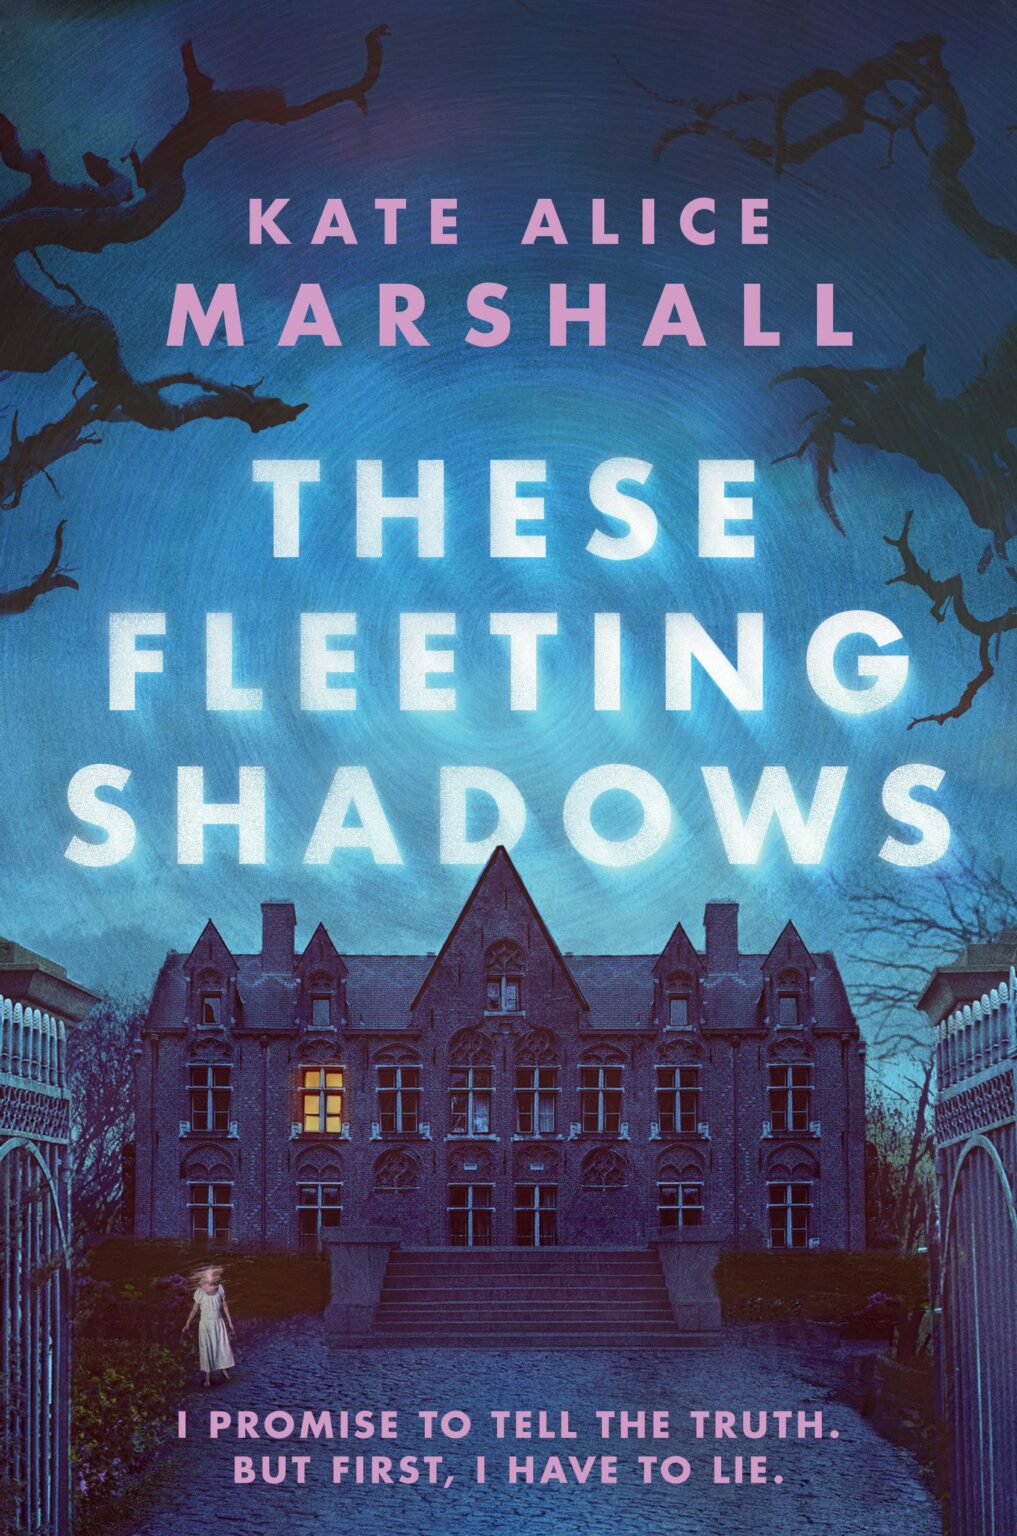 these fleeting shadows by kate alice marshall